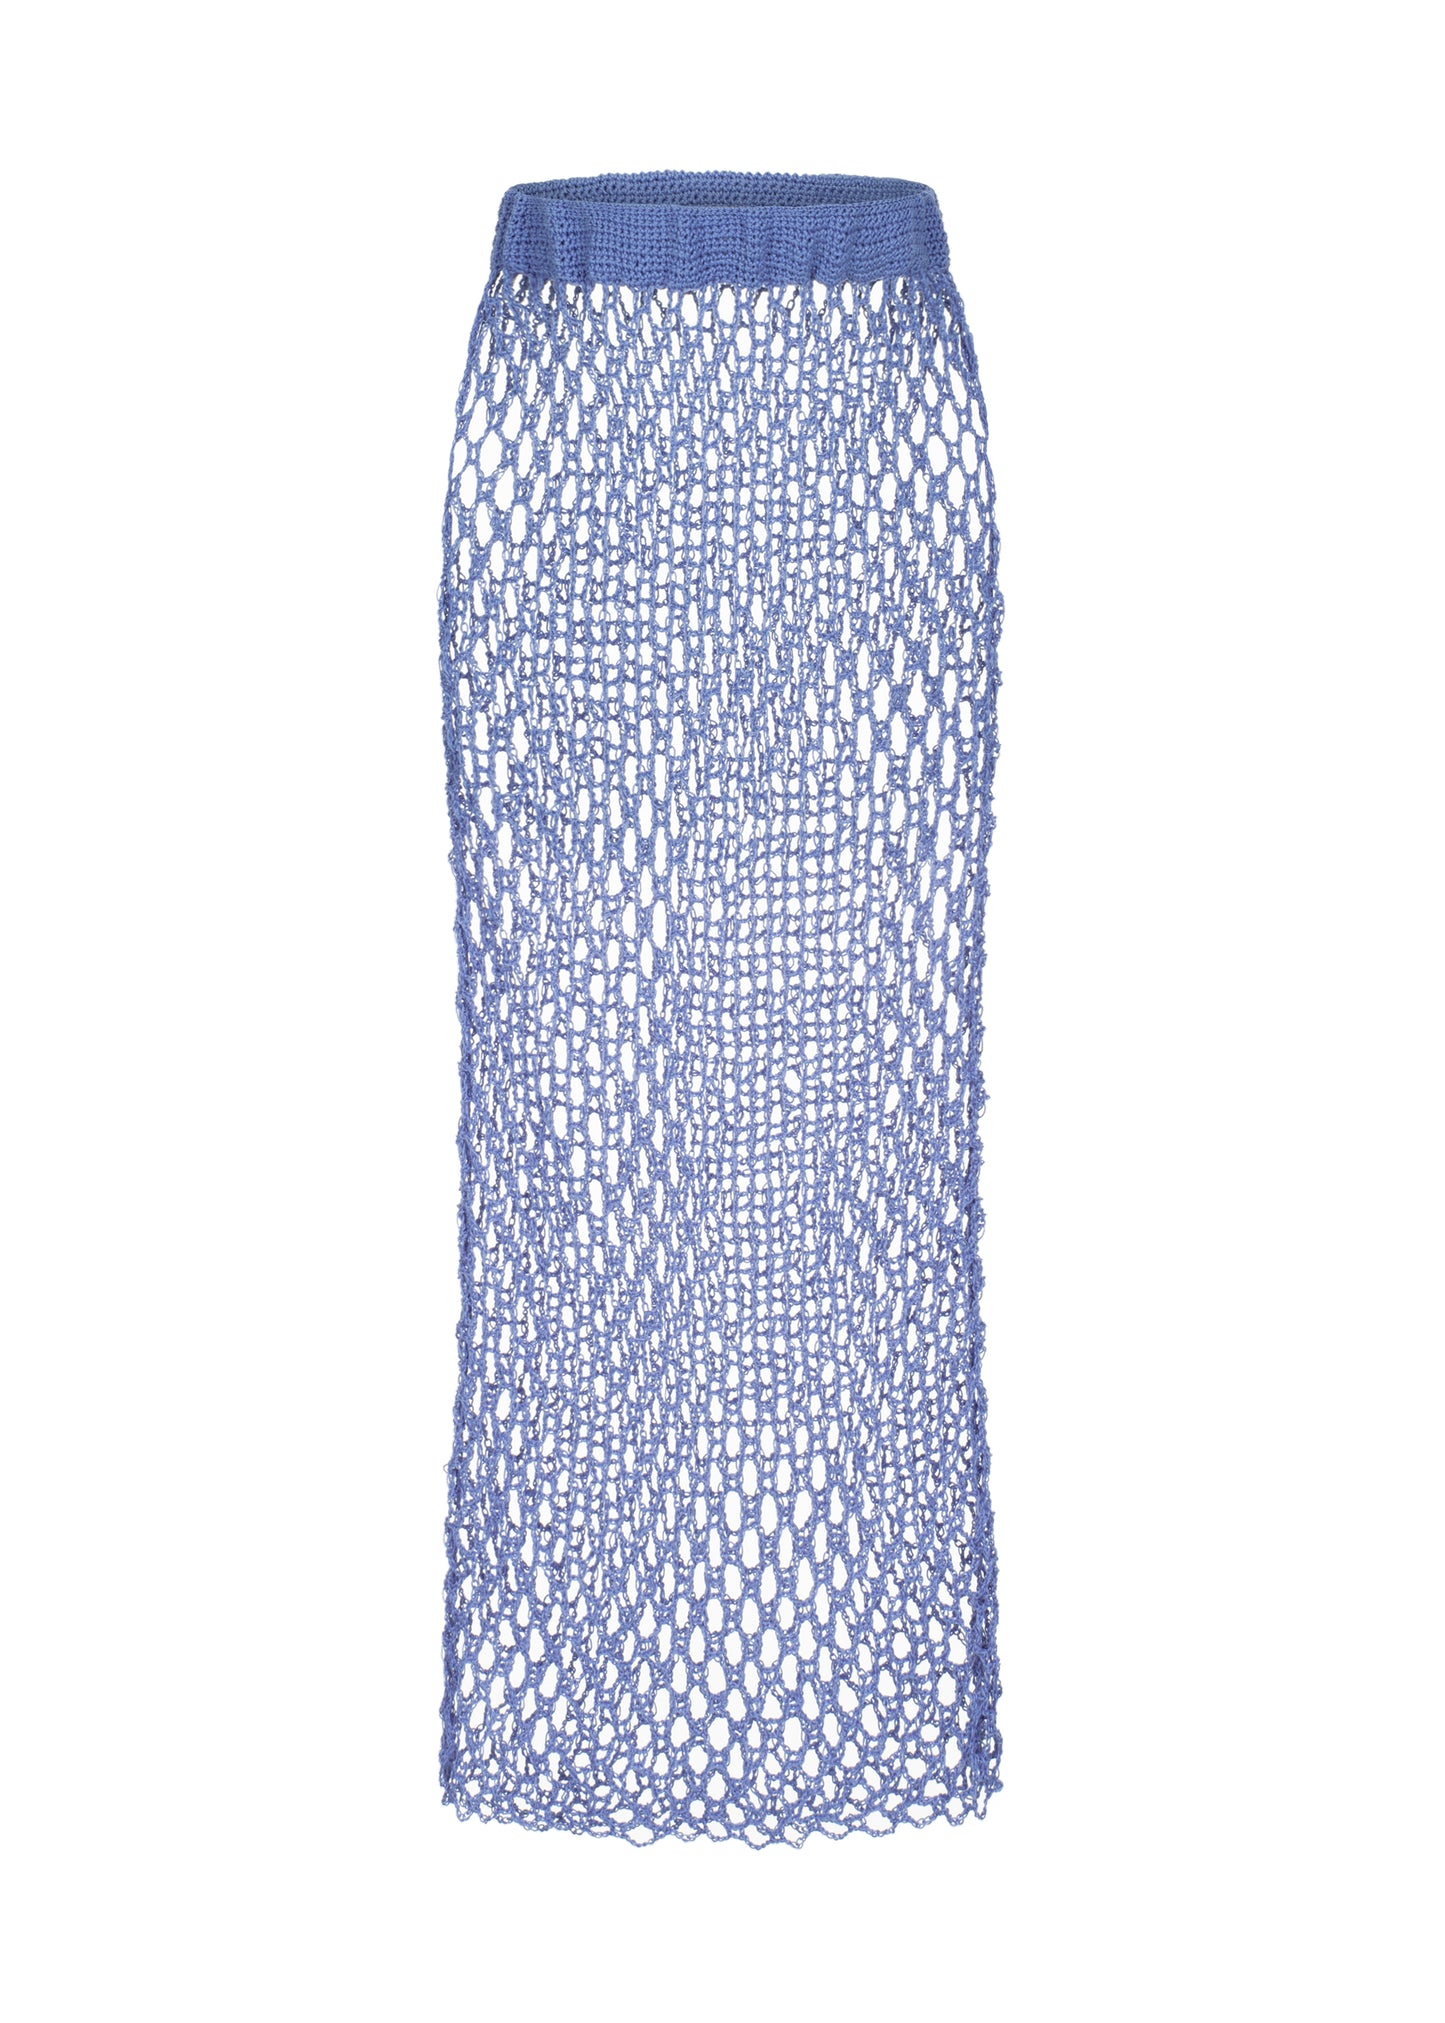 Crochet midi skirt in Blue color from clothing brand FORMA